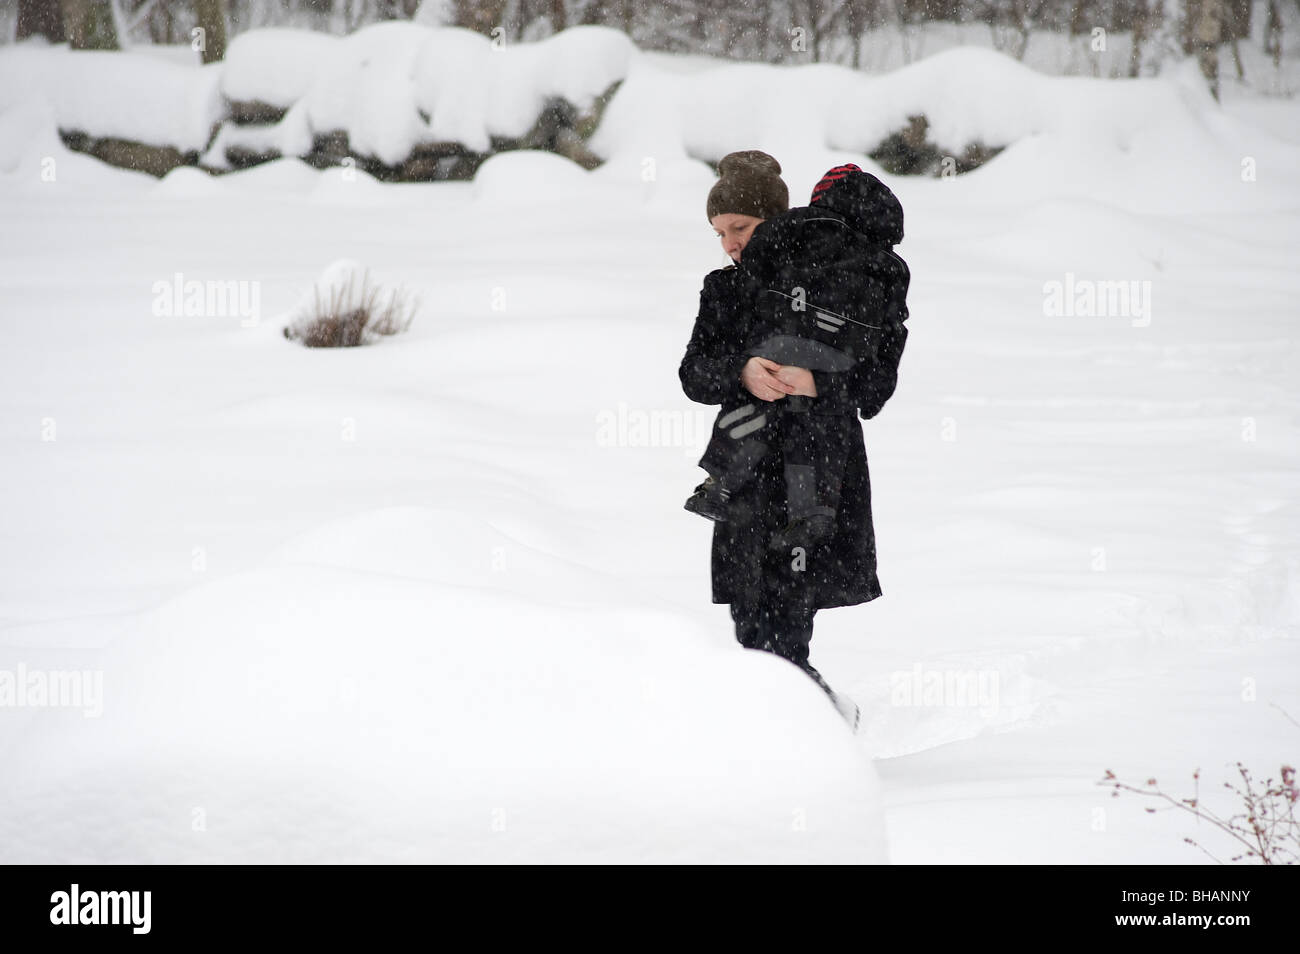 woman and child in snow, Sweden Stock Photo